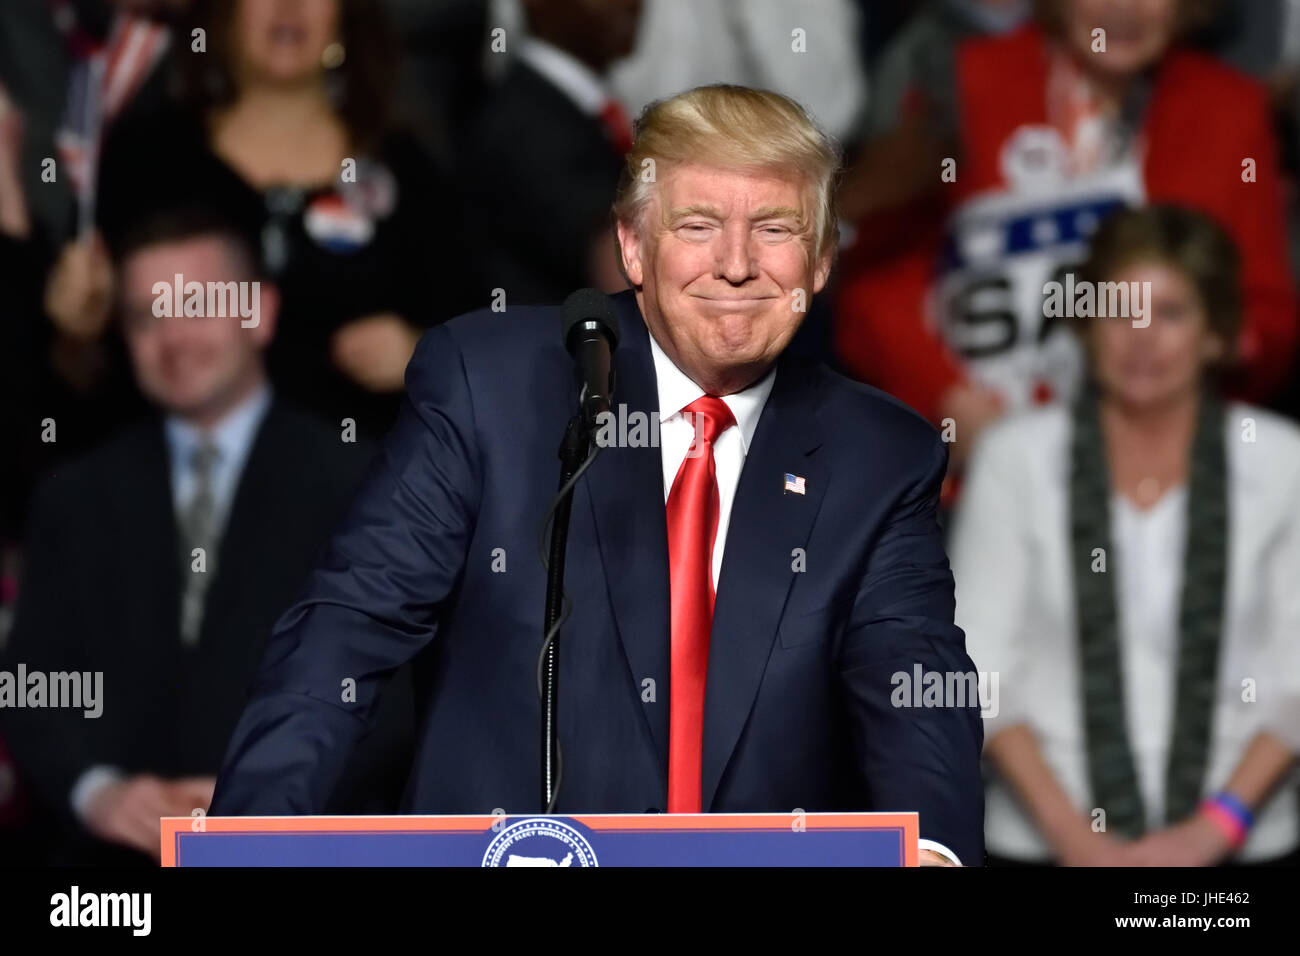 President Trump 'Cheshire cat' smile during his speech at a 'Thank You' Tour rally held at the Giant Center. Stock Photo